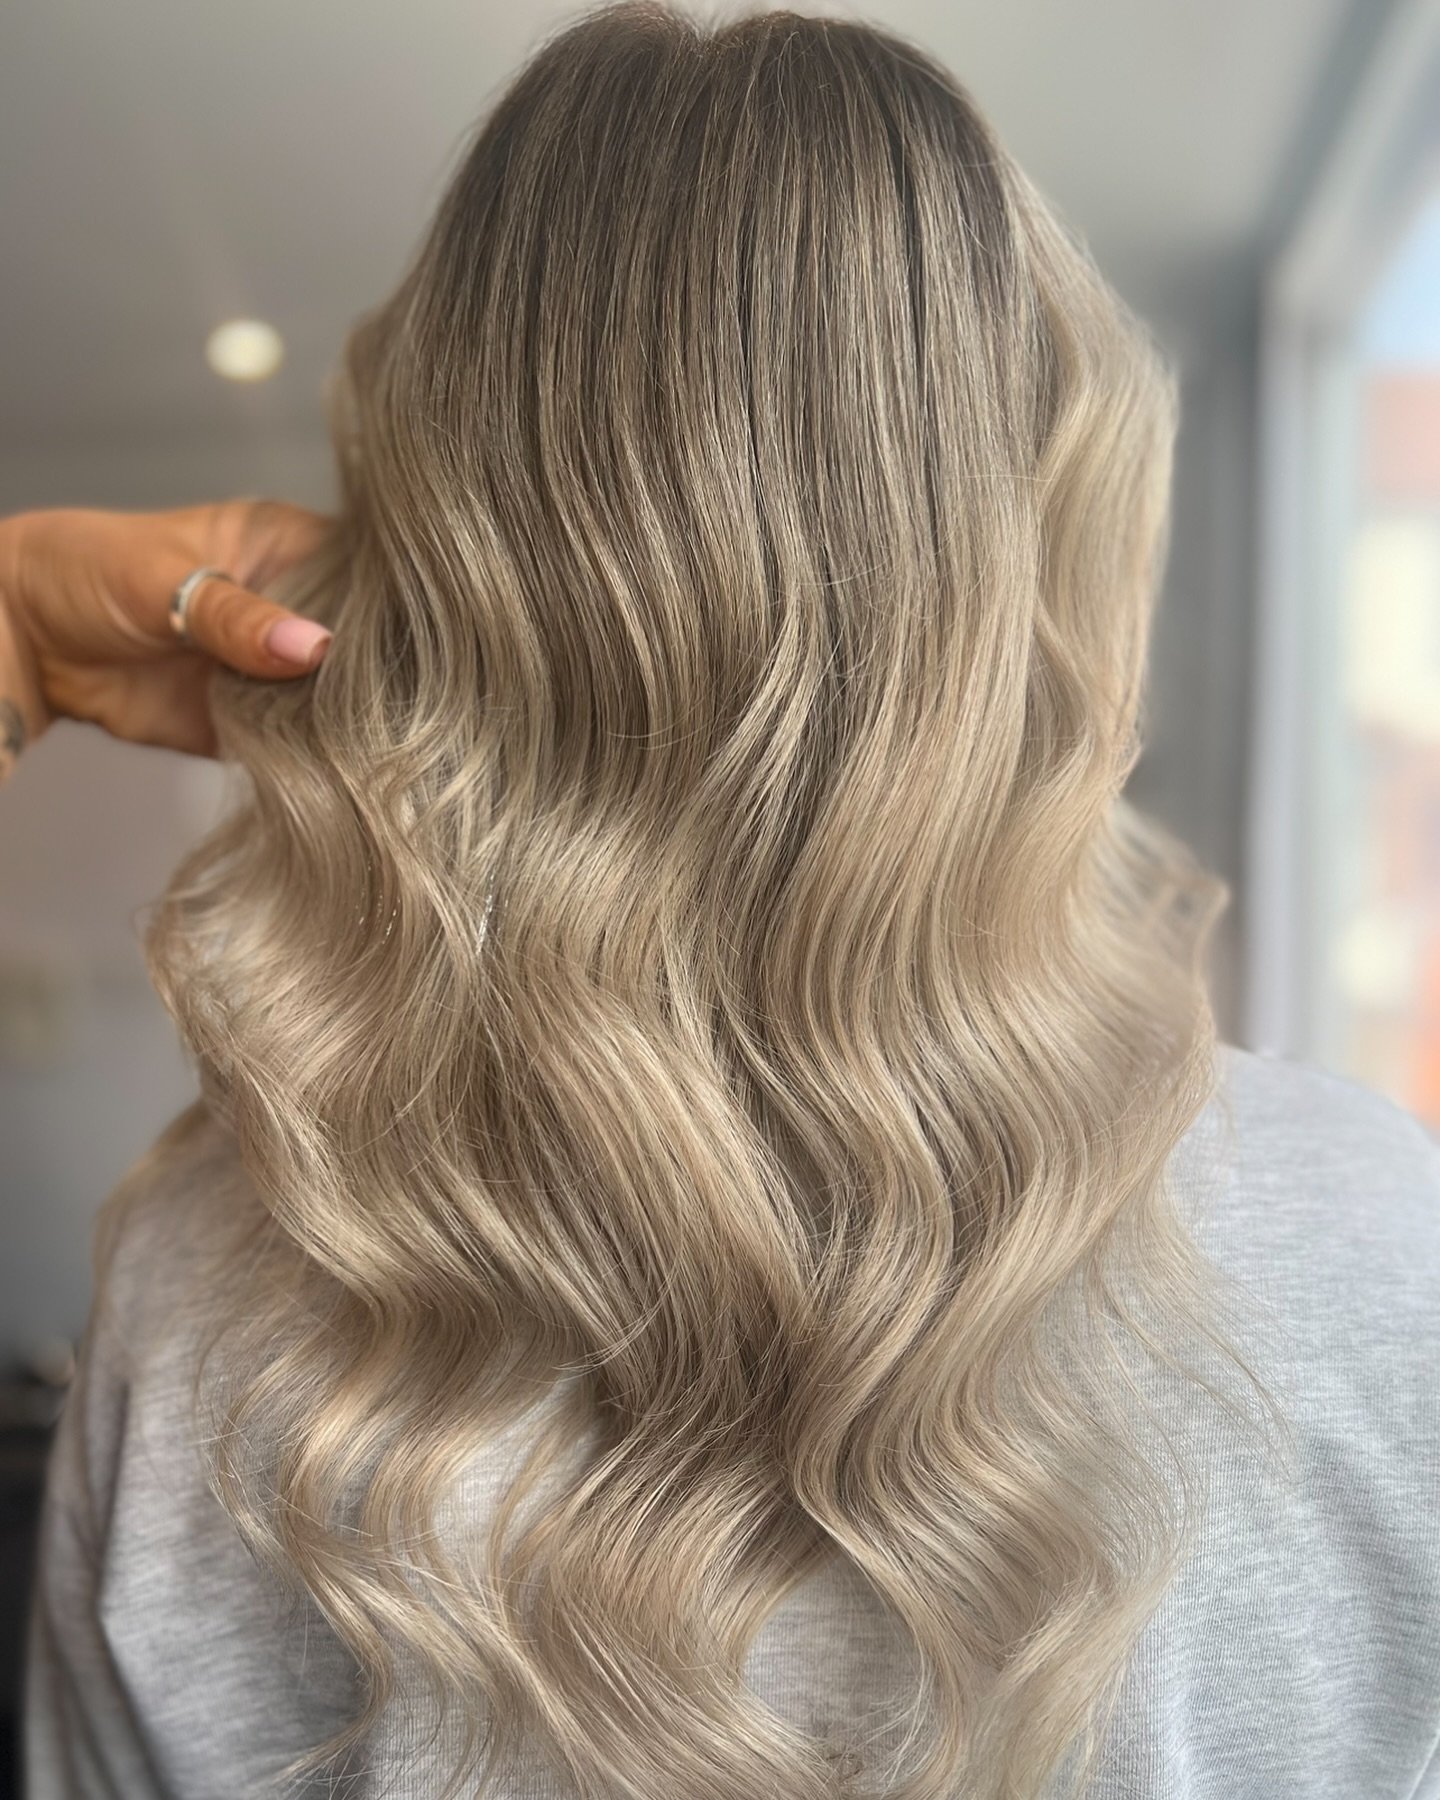 ✨Life&rsquo;s a Beach when you are blonde 🌊

&bull;
&bull;
&bull;
Created By Maia

#BlondeBeauty
#GoldenLocks
 #BlondeAmbition
#BeachBlonde
#SunKissedBlonde
#BlondeBombshell
#BlondeLife
#BlondeVibes
 #SunkissedAndBlonde
#BlondeGoals
#BlondeAndBeauti